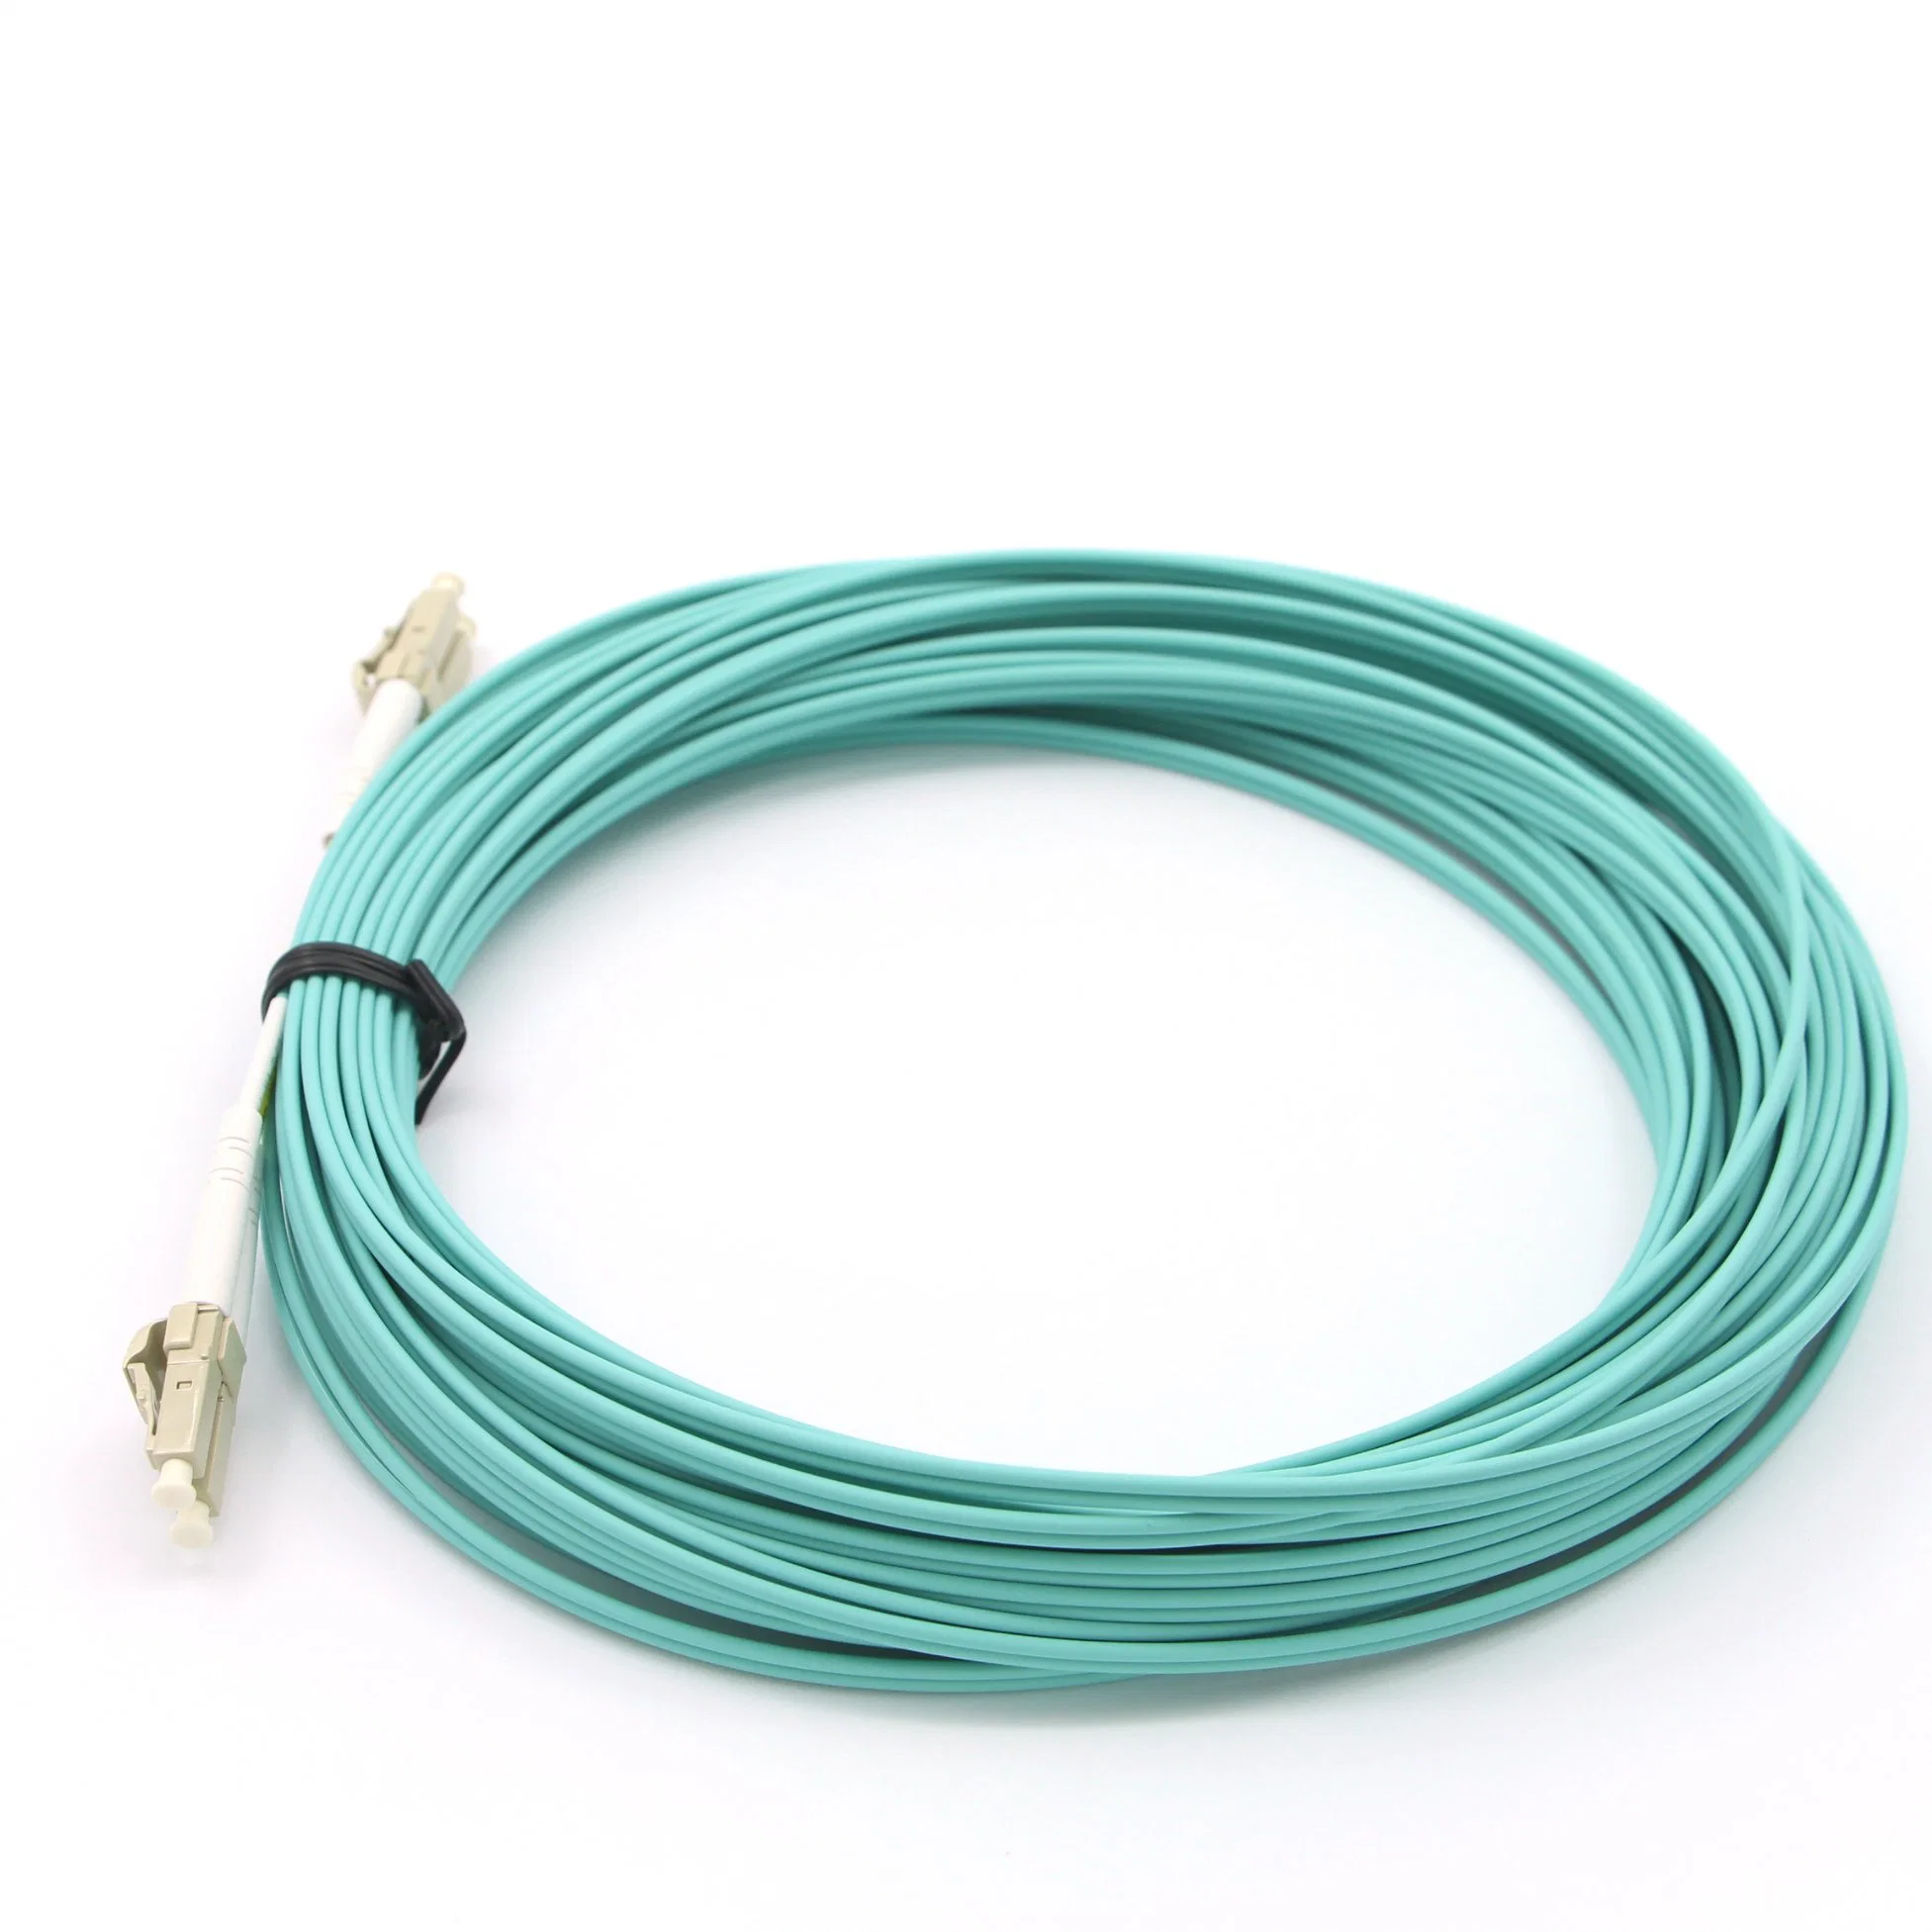 LC-LC Om3 Duplex 1.8mm Fiber Optics Patch Cord with 13 Meters